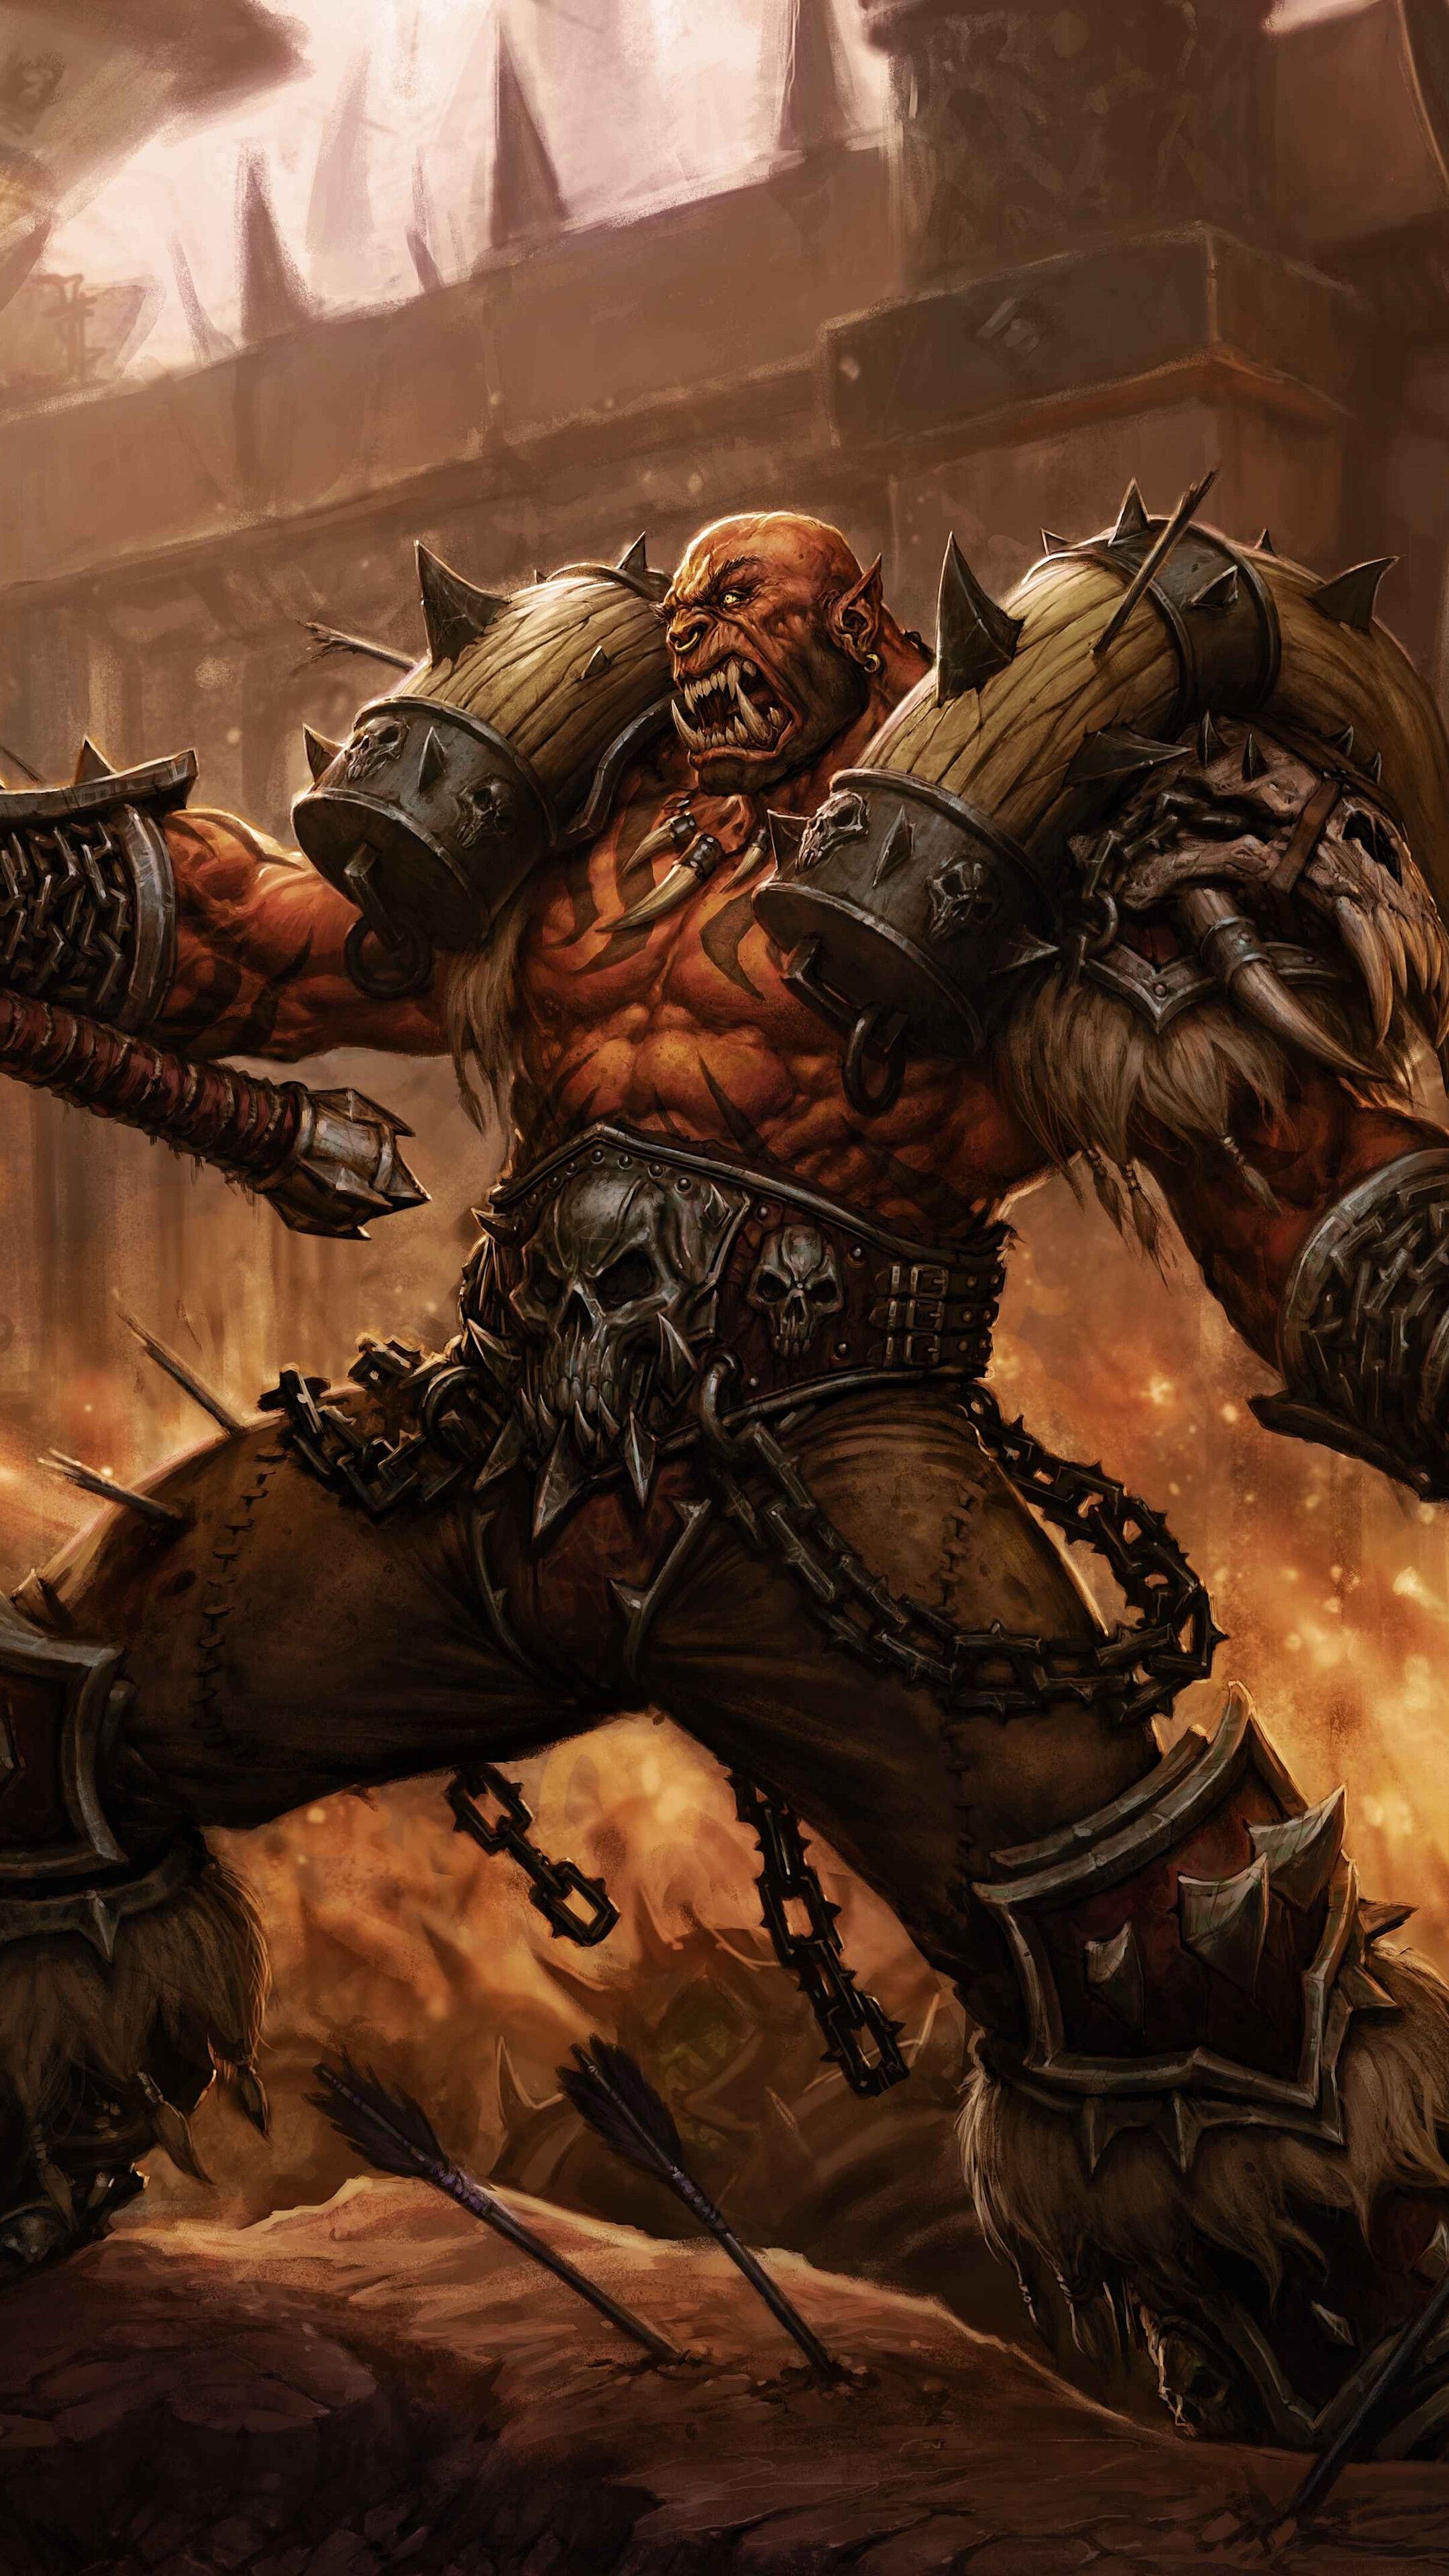 Garrosh Hellscream, Top wallpapers, Chieftain of the Horde, Warchief's might, 2160x3840 4K Phone